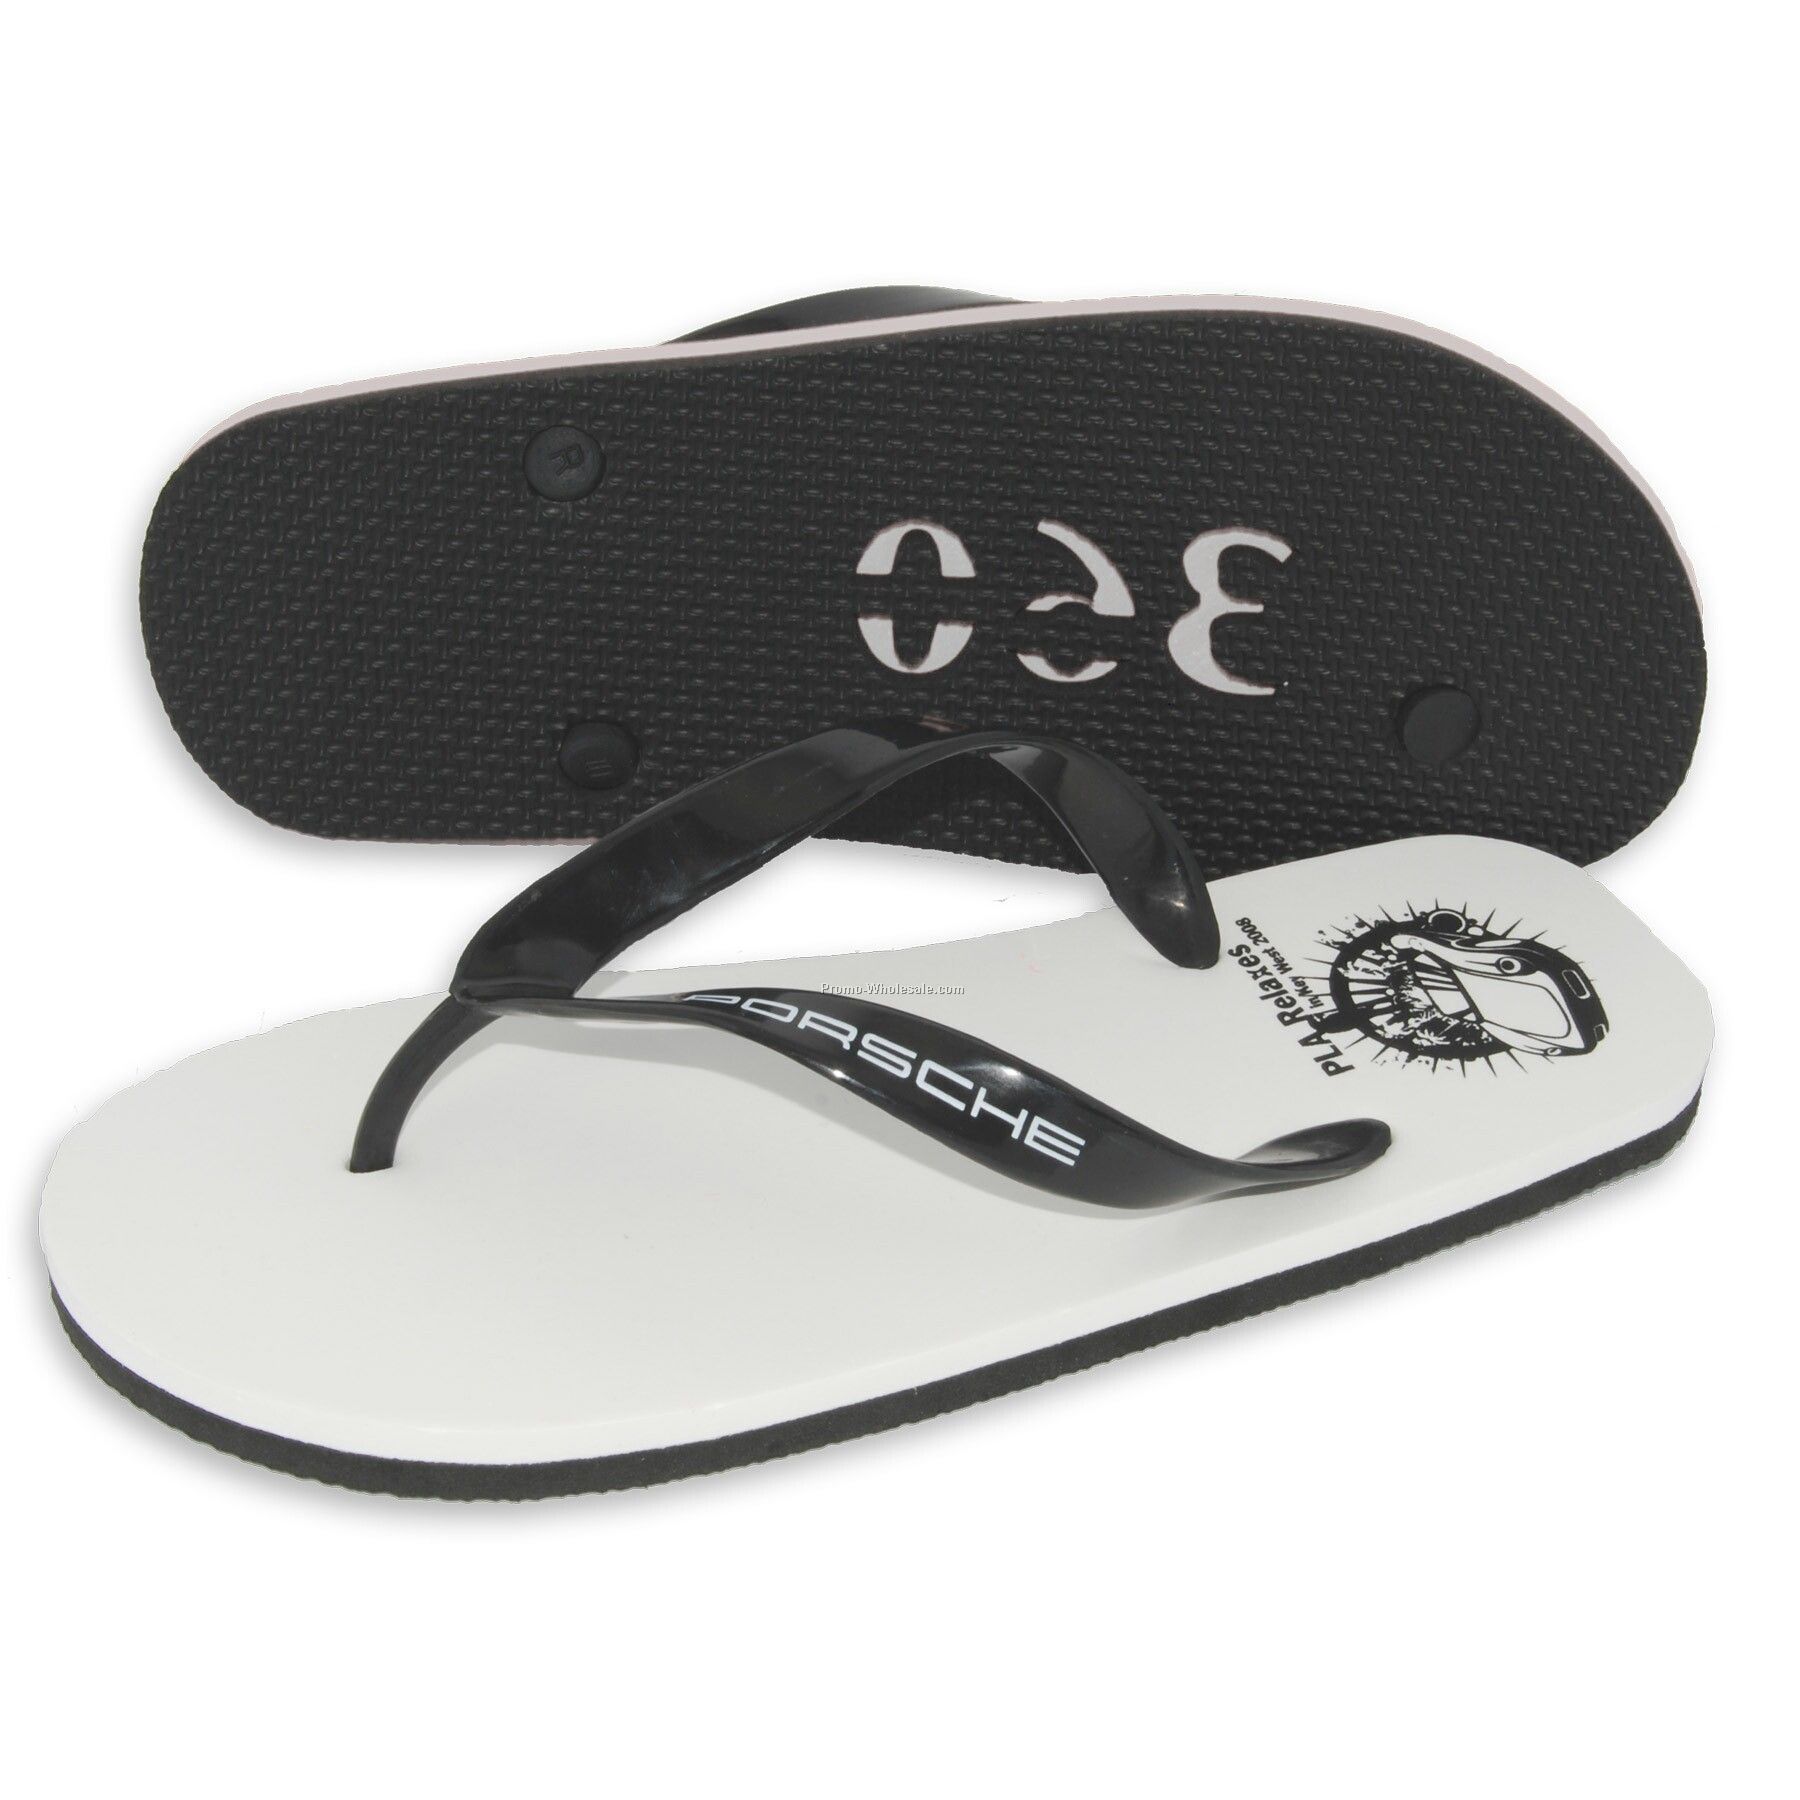 The Newport Sandals - Zori Style Flip Flop With 14 Mm 2-layer Sole (Import)